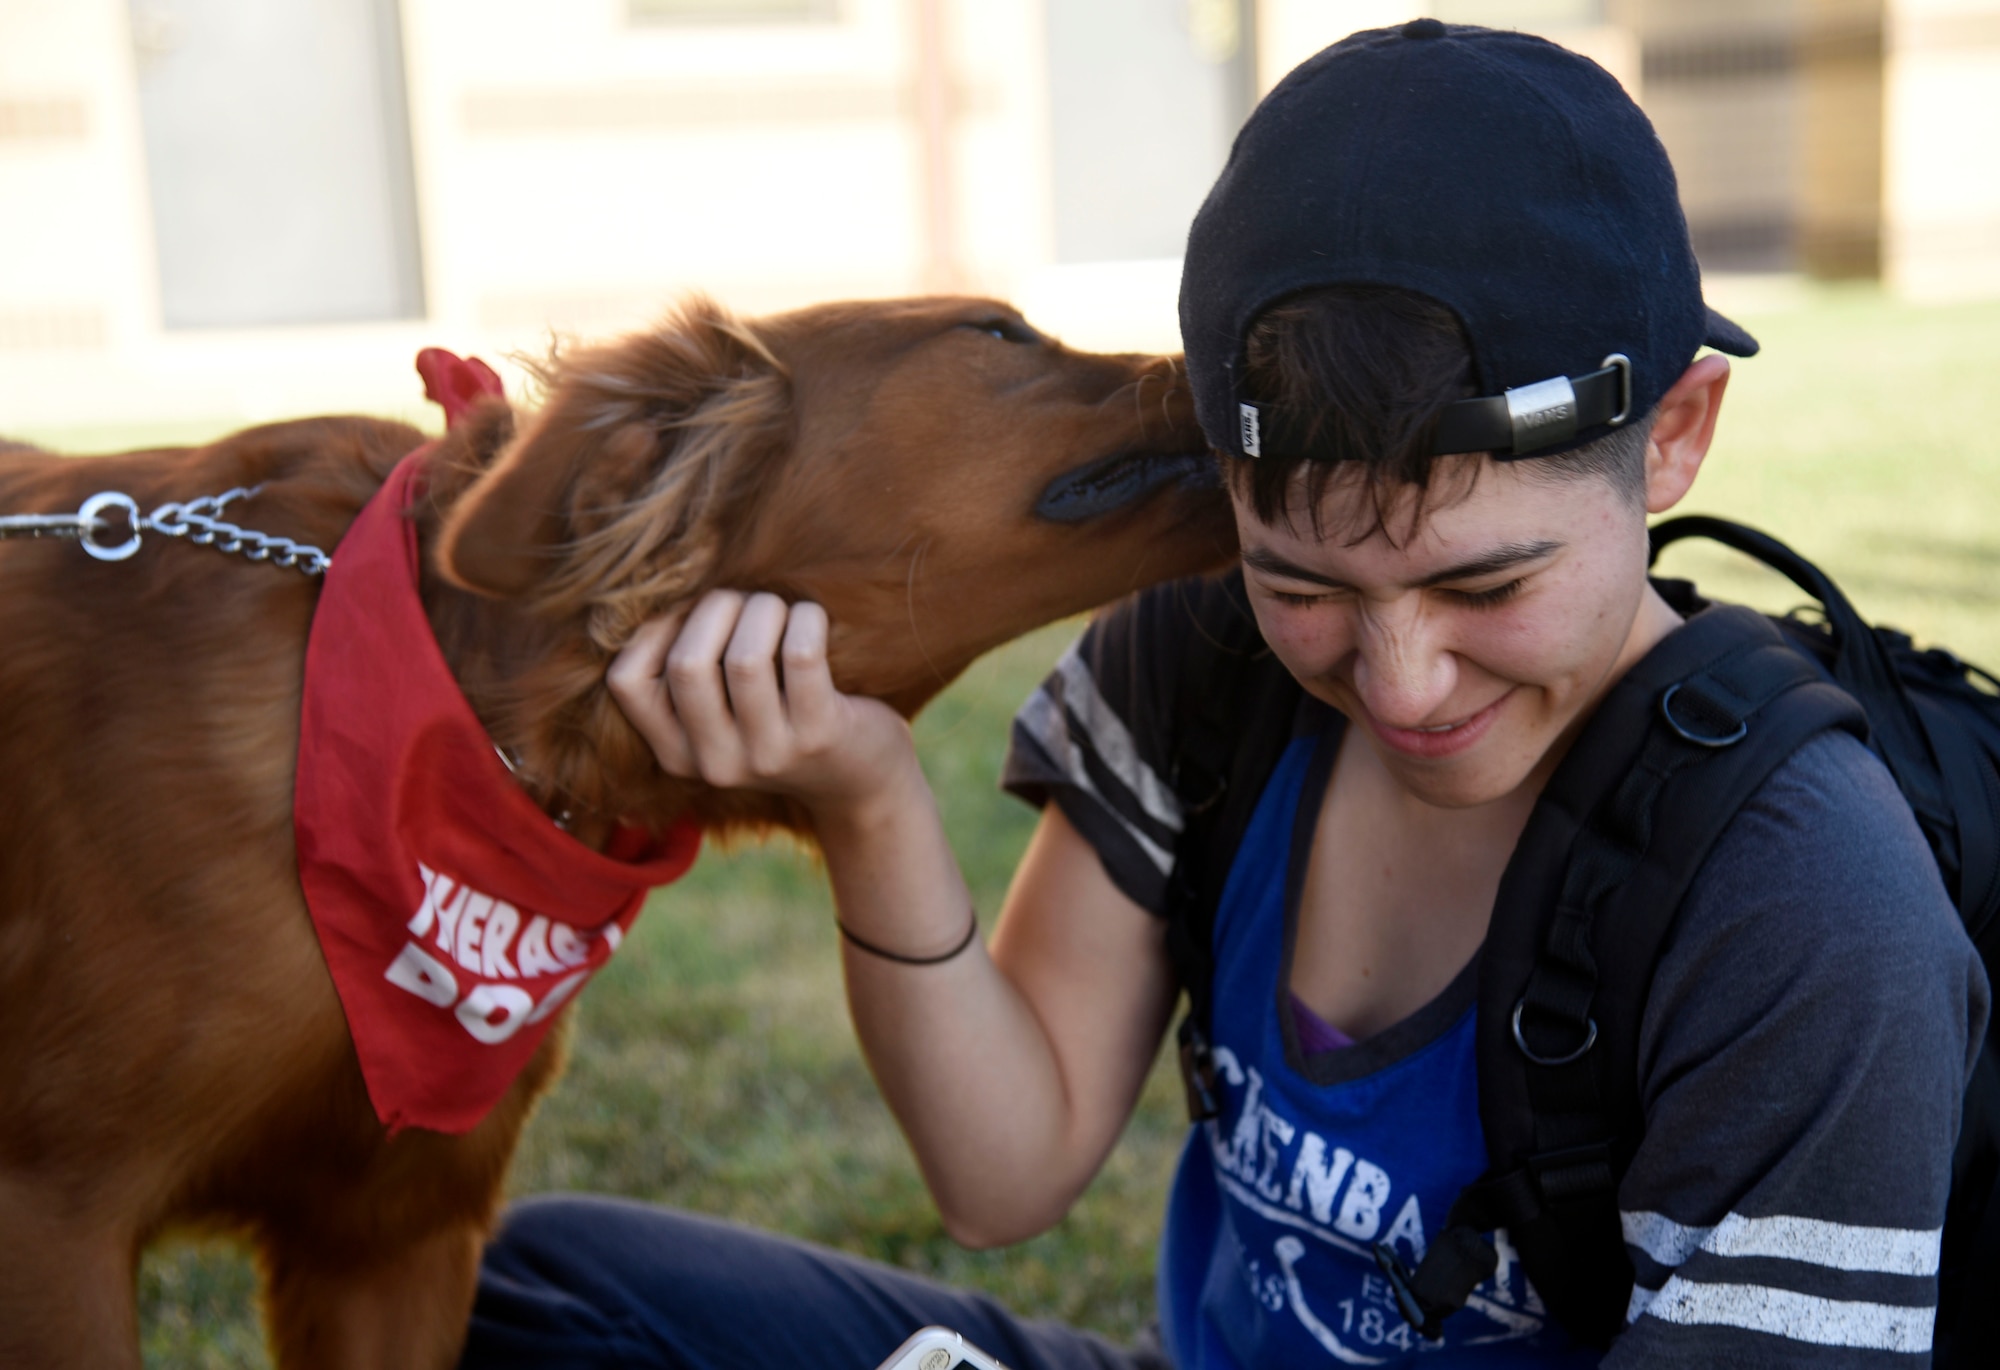 Airman Angela Alanis, 22nd Logistics Readiness Squadron materiel management technician, interacts with a therapy dog, July 25, 2017, at McConnell Air Force Base, Kan. Four therapy dogs and their owners from Love on a Leash visited dorm residents to increase morale. (U.S. Air Force photo/Airman 1st Class Erin McClellan)